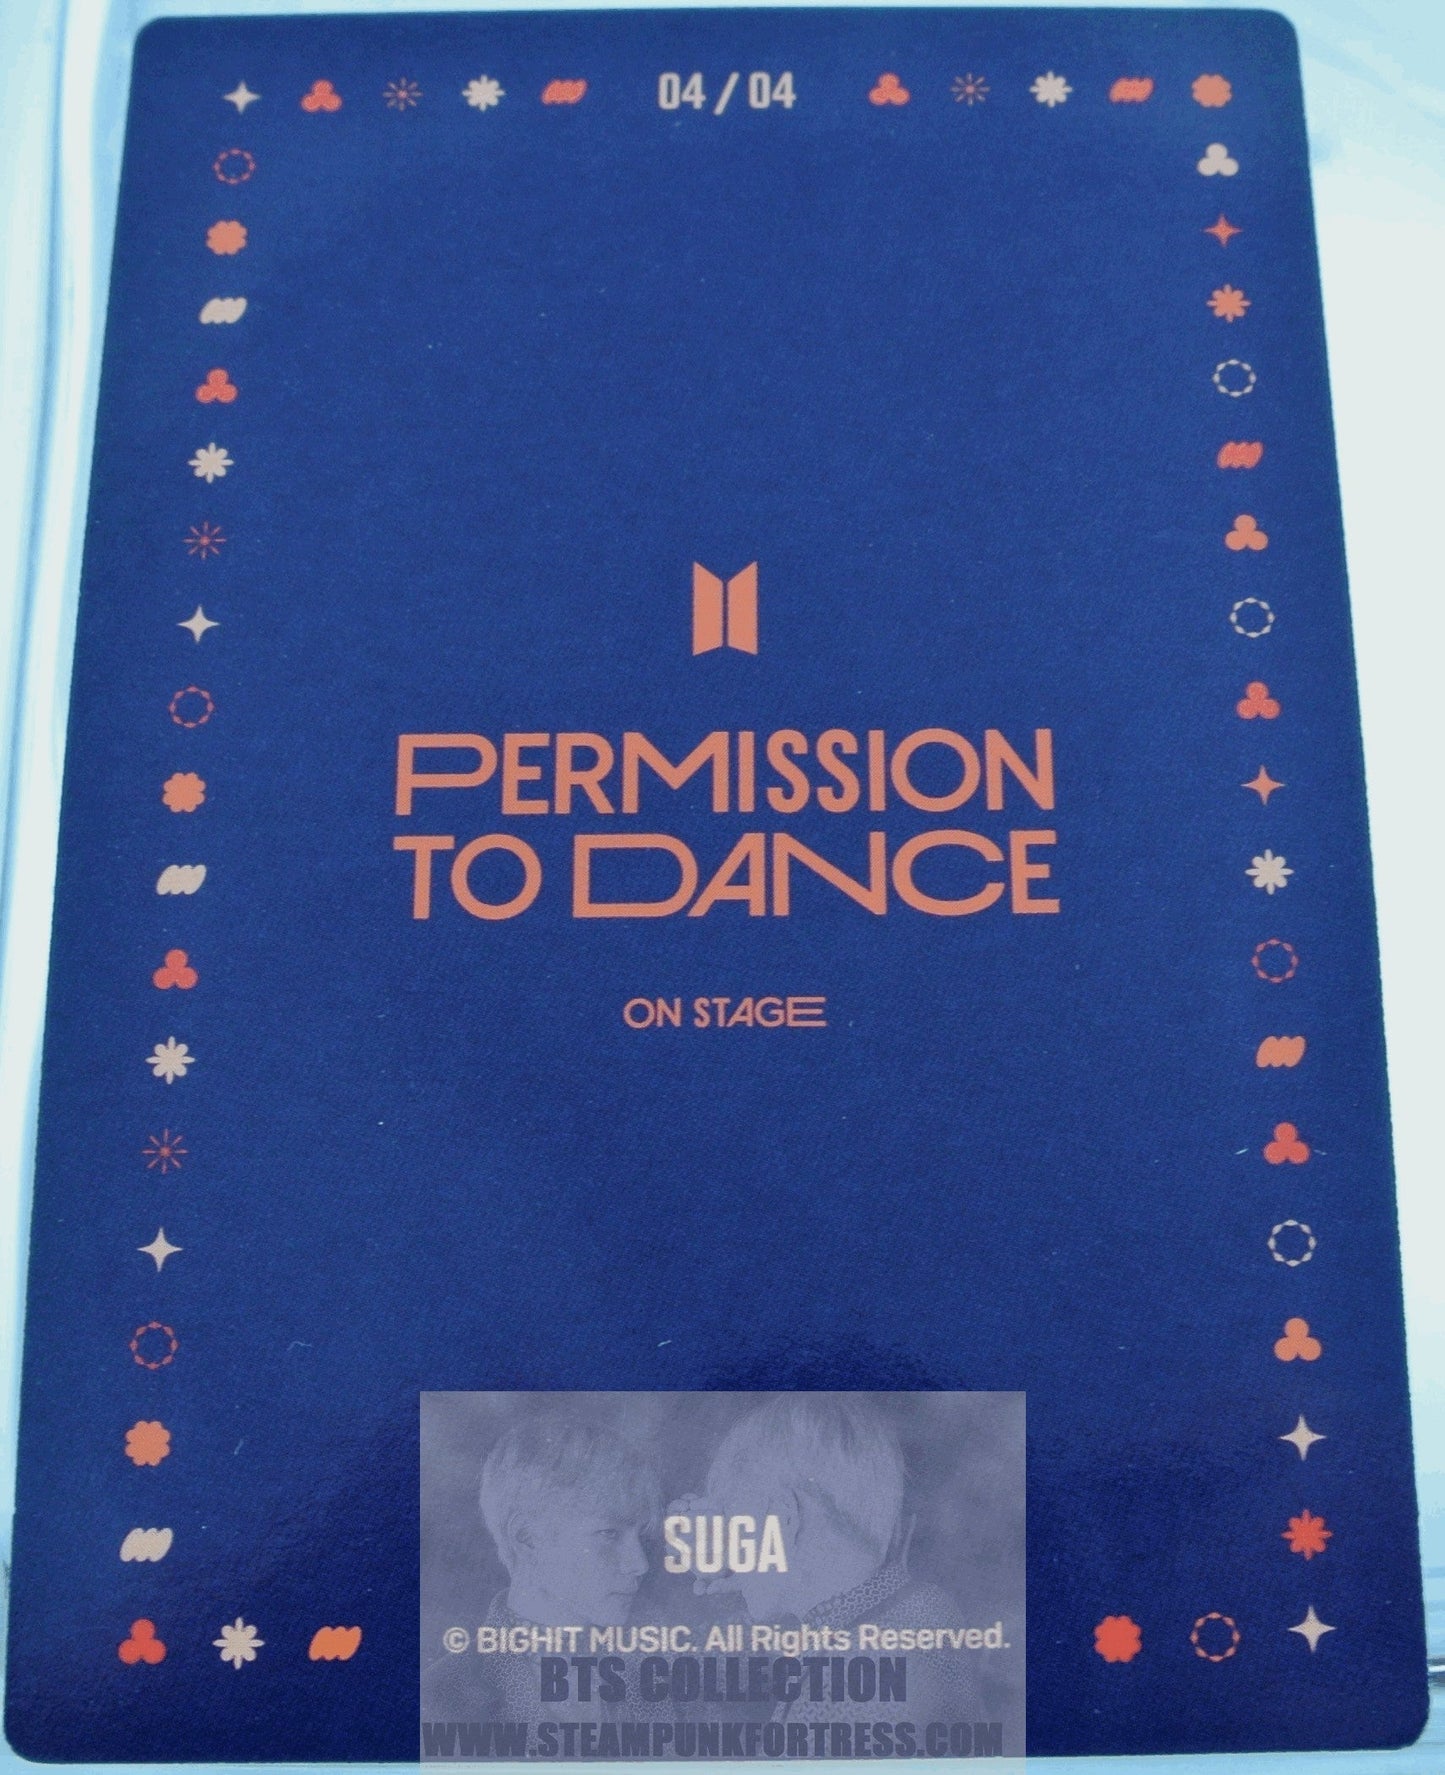 BTS SUGA MIN YOONGI YOON-GI PTD 2022 PERMISSION TO DANCE ON STAGE SEOUL #4 OF 4 PHOTOCARD PHOTO CARD NEW OFFICIAL MERCHANDISE